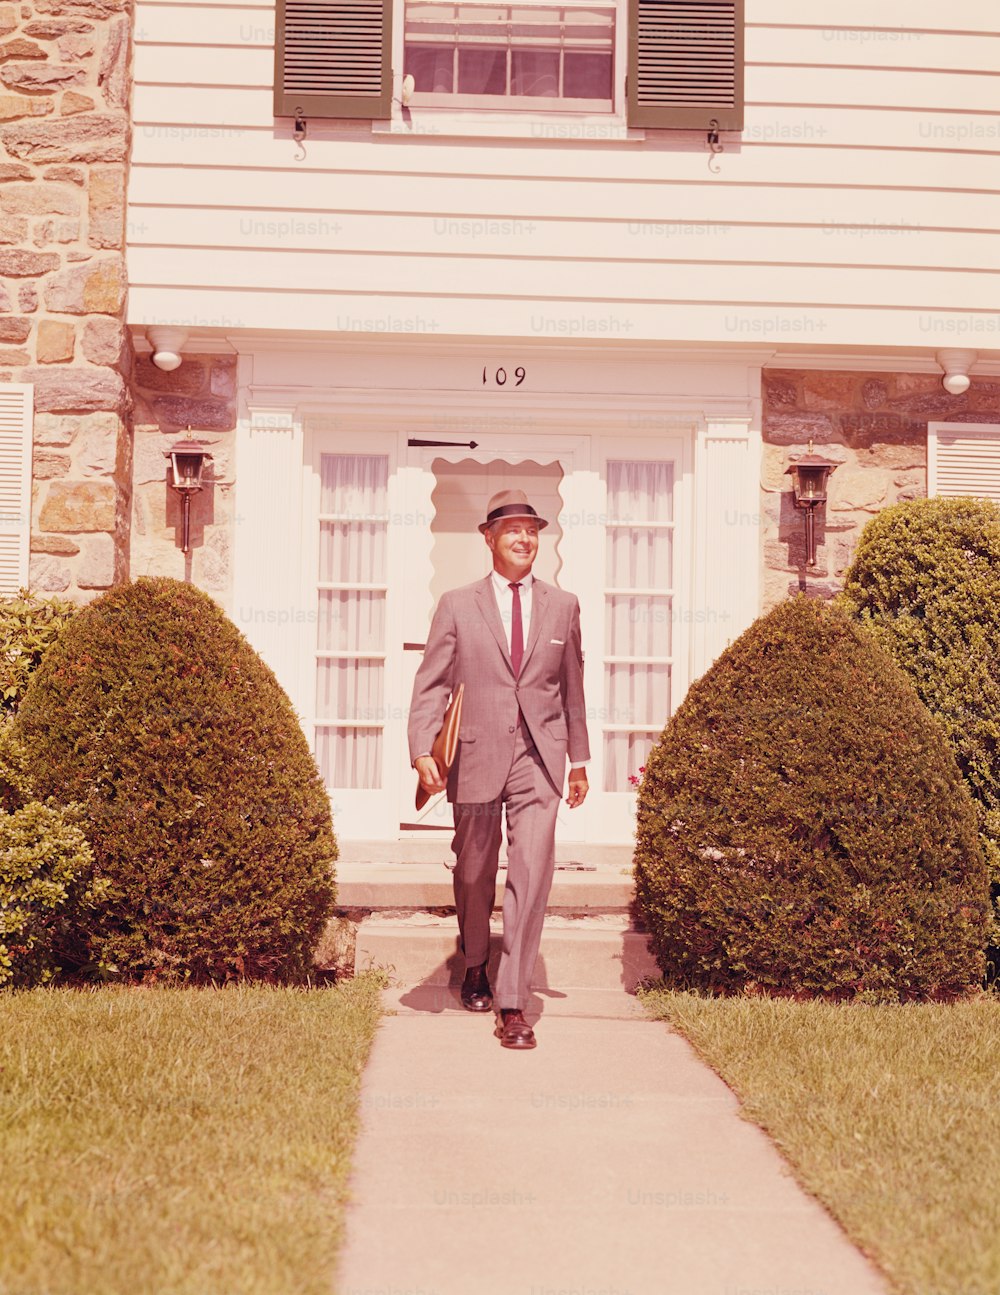 UNITED STATES - CIRCA 1960s:  Salesman wearing hat and carrying briefcase, walking along suburban street.